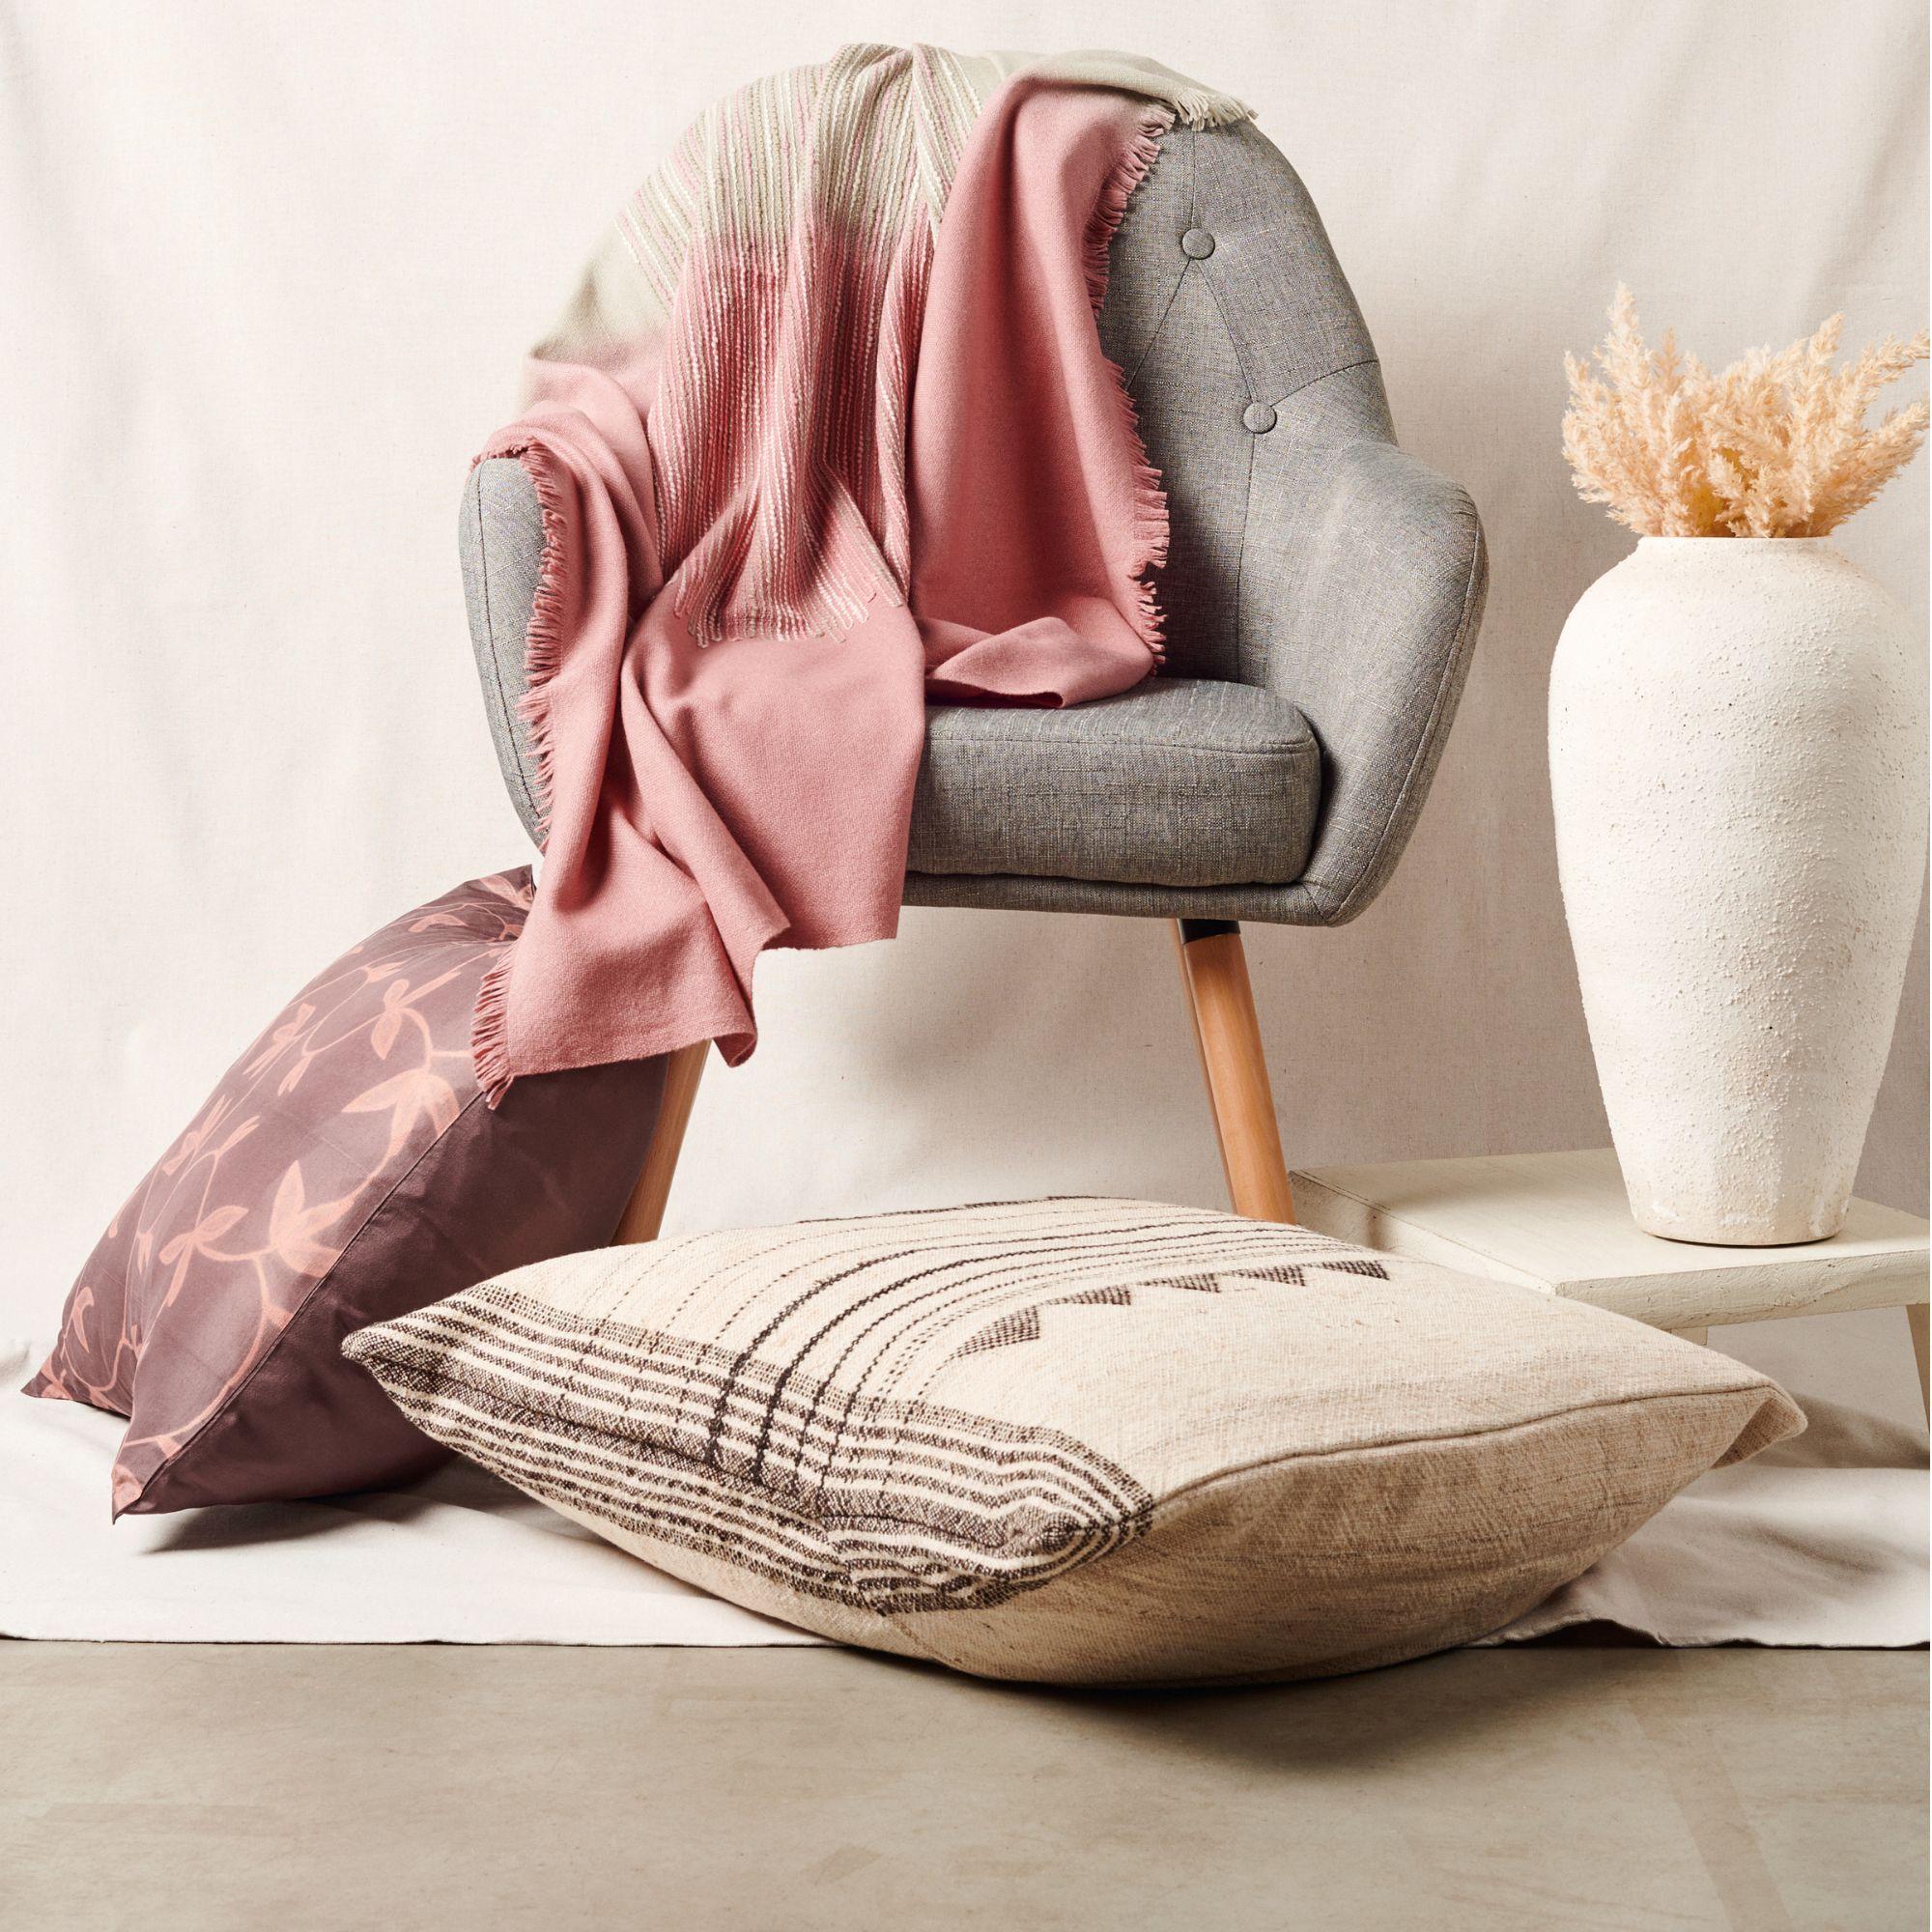 Chive Throw is a pure modern take on combining shape, sombre color palette and fine detail of hand embroidery done meticulously on a handwoven textile. Each piece is 100% handmade making it a unique sustainable throw which is both classic and